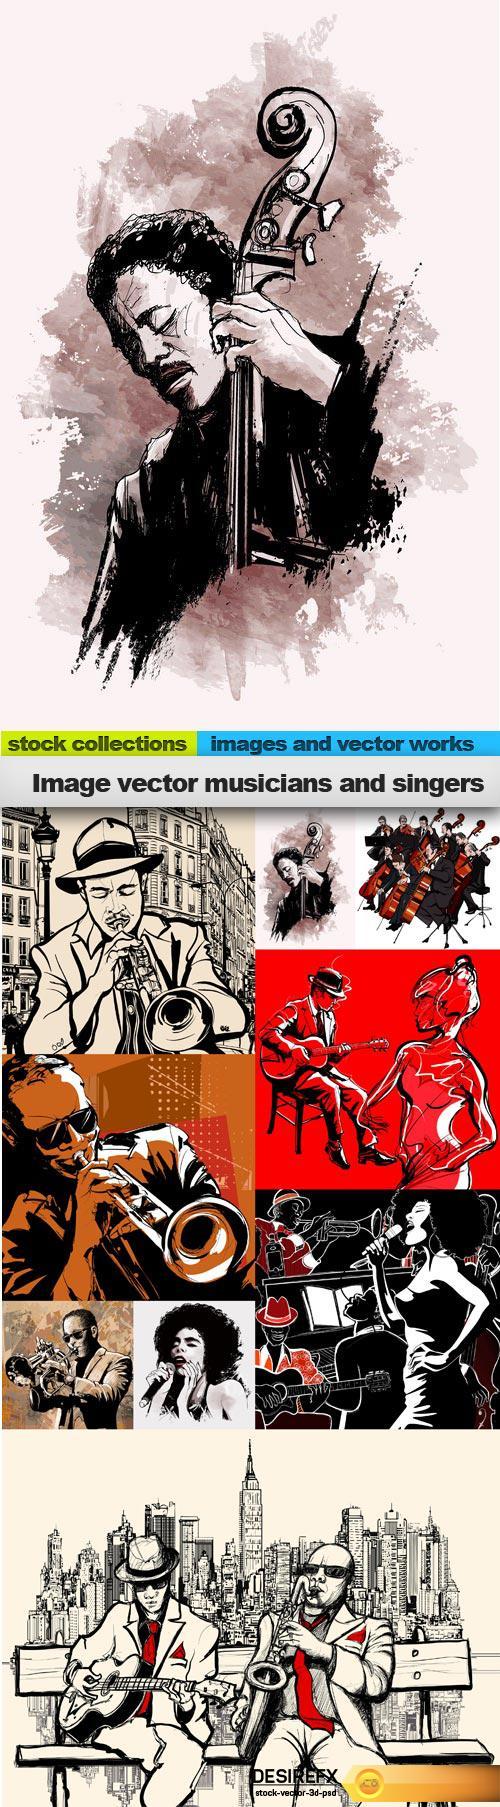 Image vector musicians and singers, 09 x EPS 